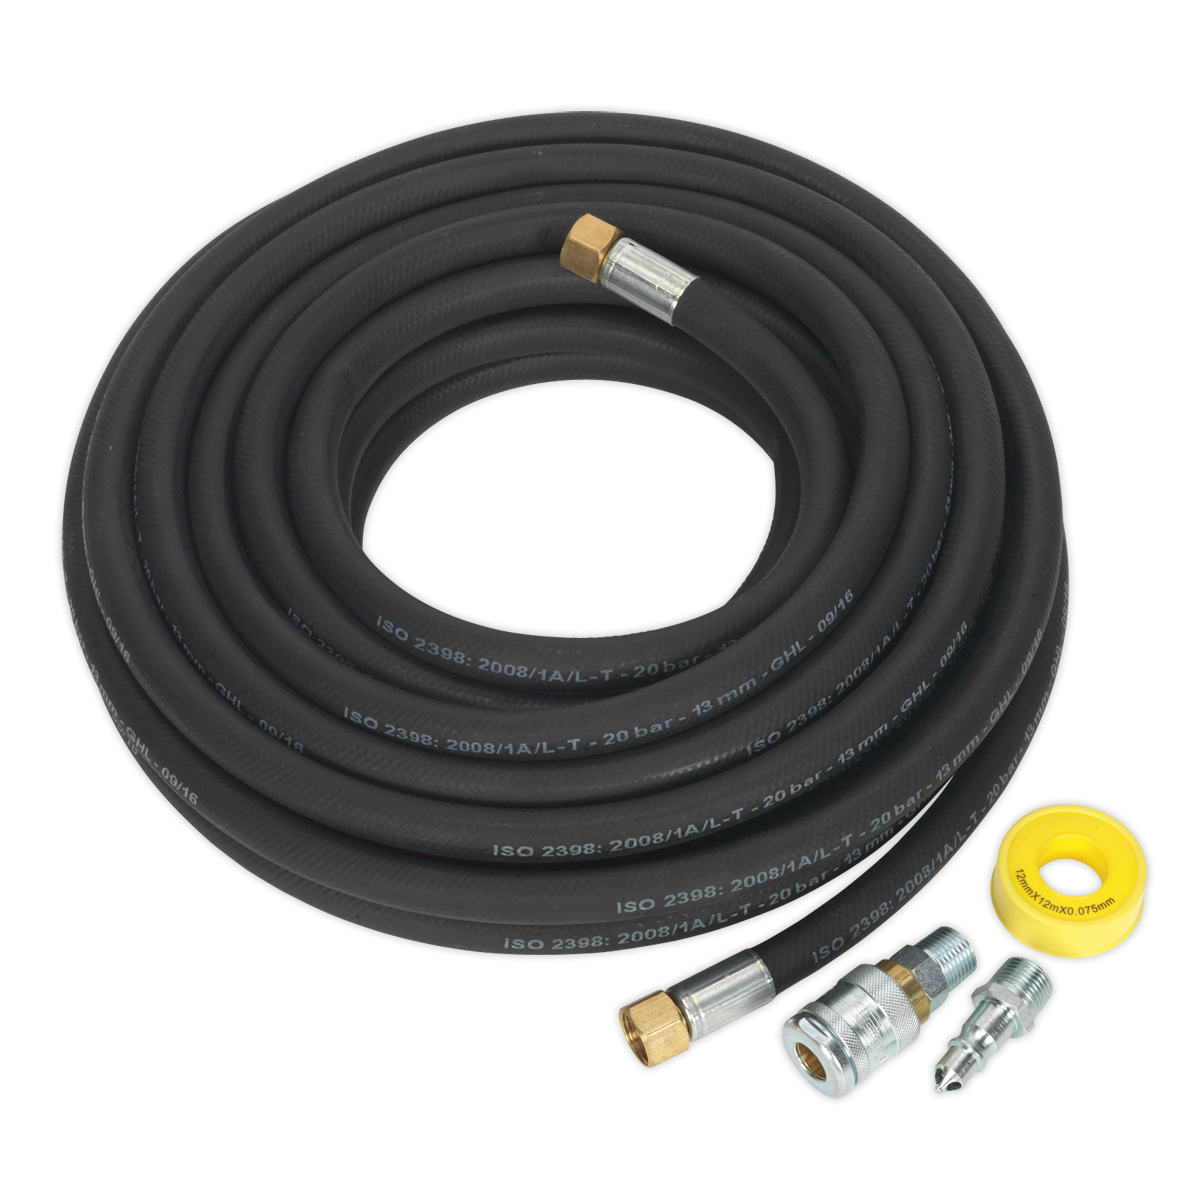 Sealey Tools Air Hose Kit 15m x Ø13mm High Flow with 100 Series